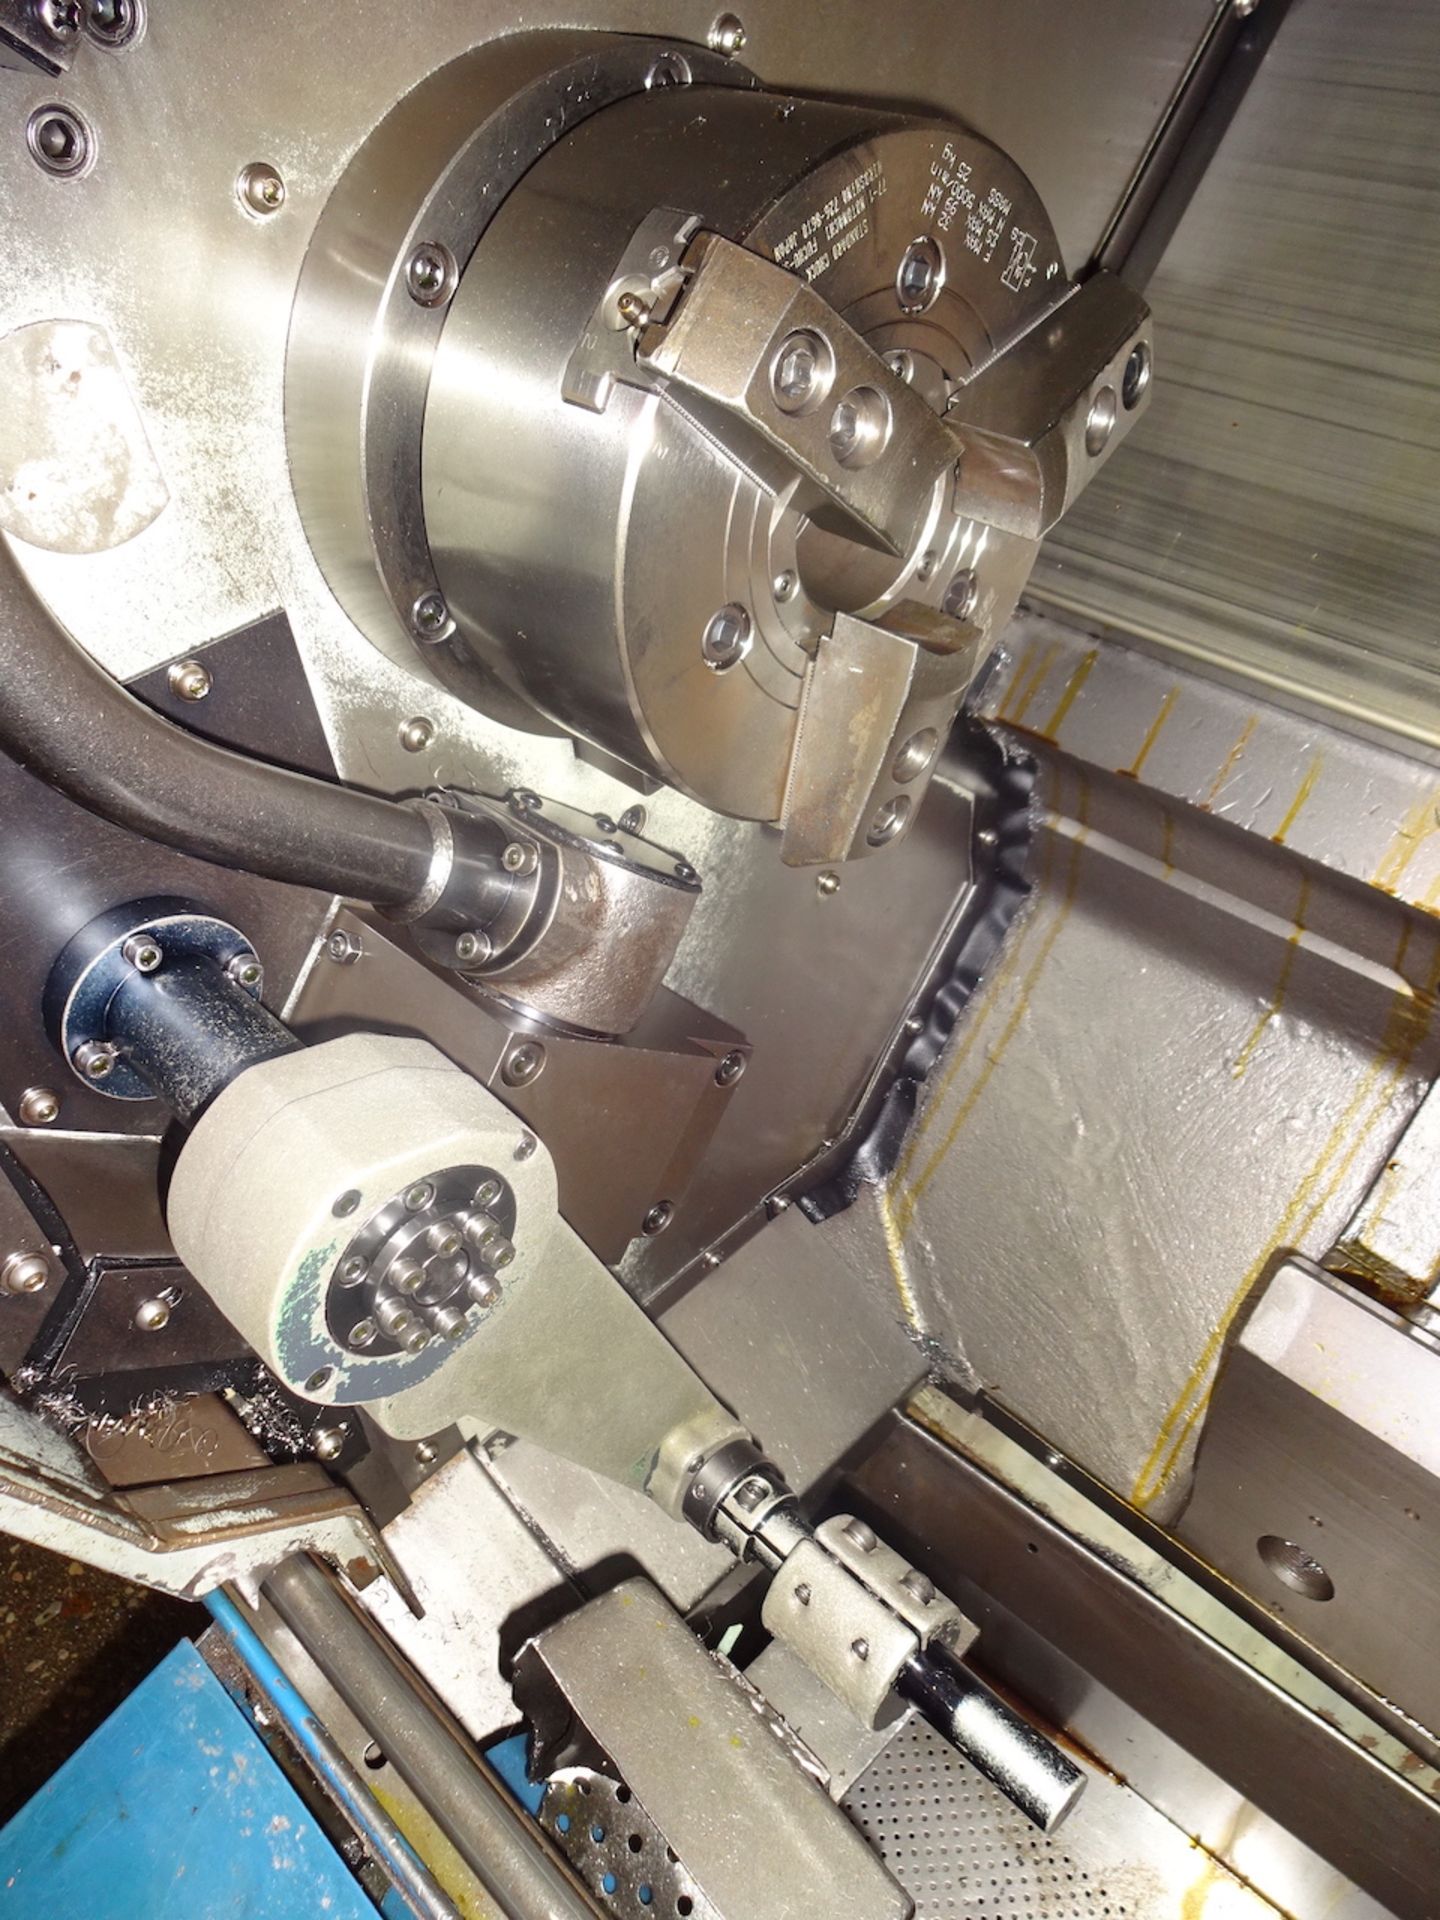 2003 DAEWOO MODEL PUMA 240LMB CNC 2-AXIS TURNING CENTER, S/N P24M0175, 8 IN. 3-JAW CHUCK, 12- - Image 3 of 8